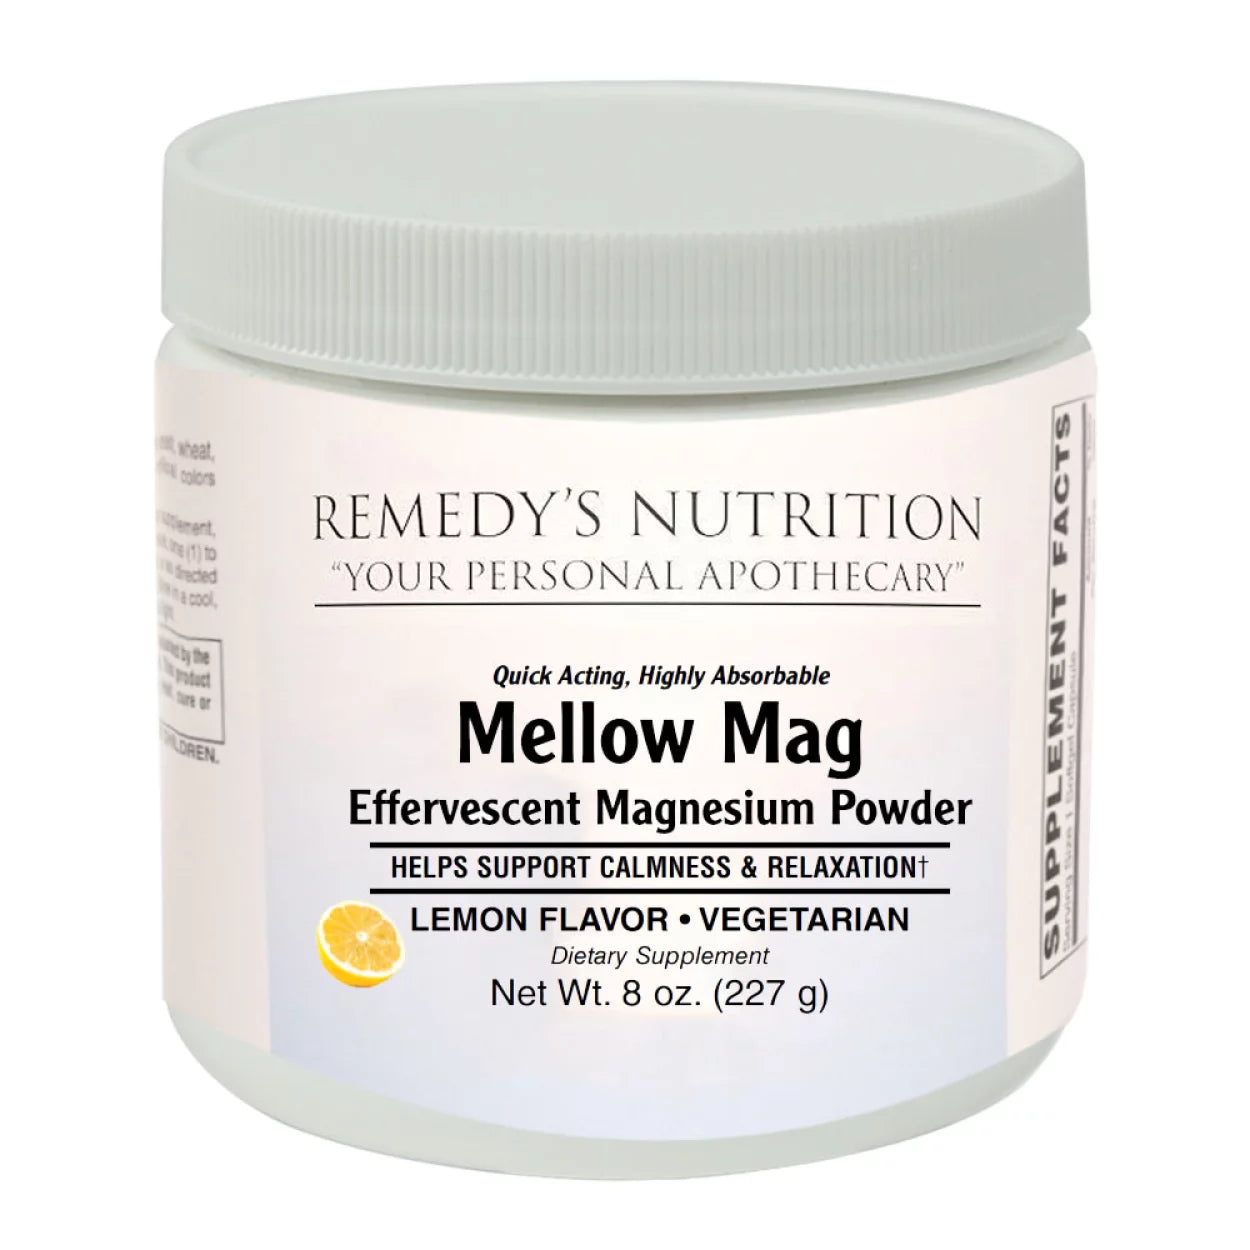 Image of Remedy's Nutrition® Mellow Mag™ Flavored Effervescent Magnesium Powder Dietary Supplement front bottle.